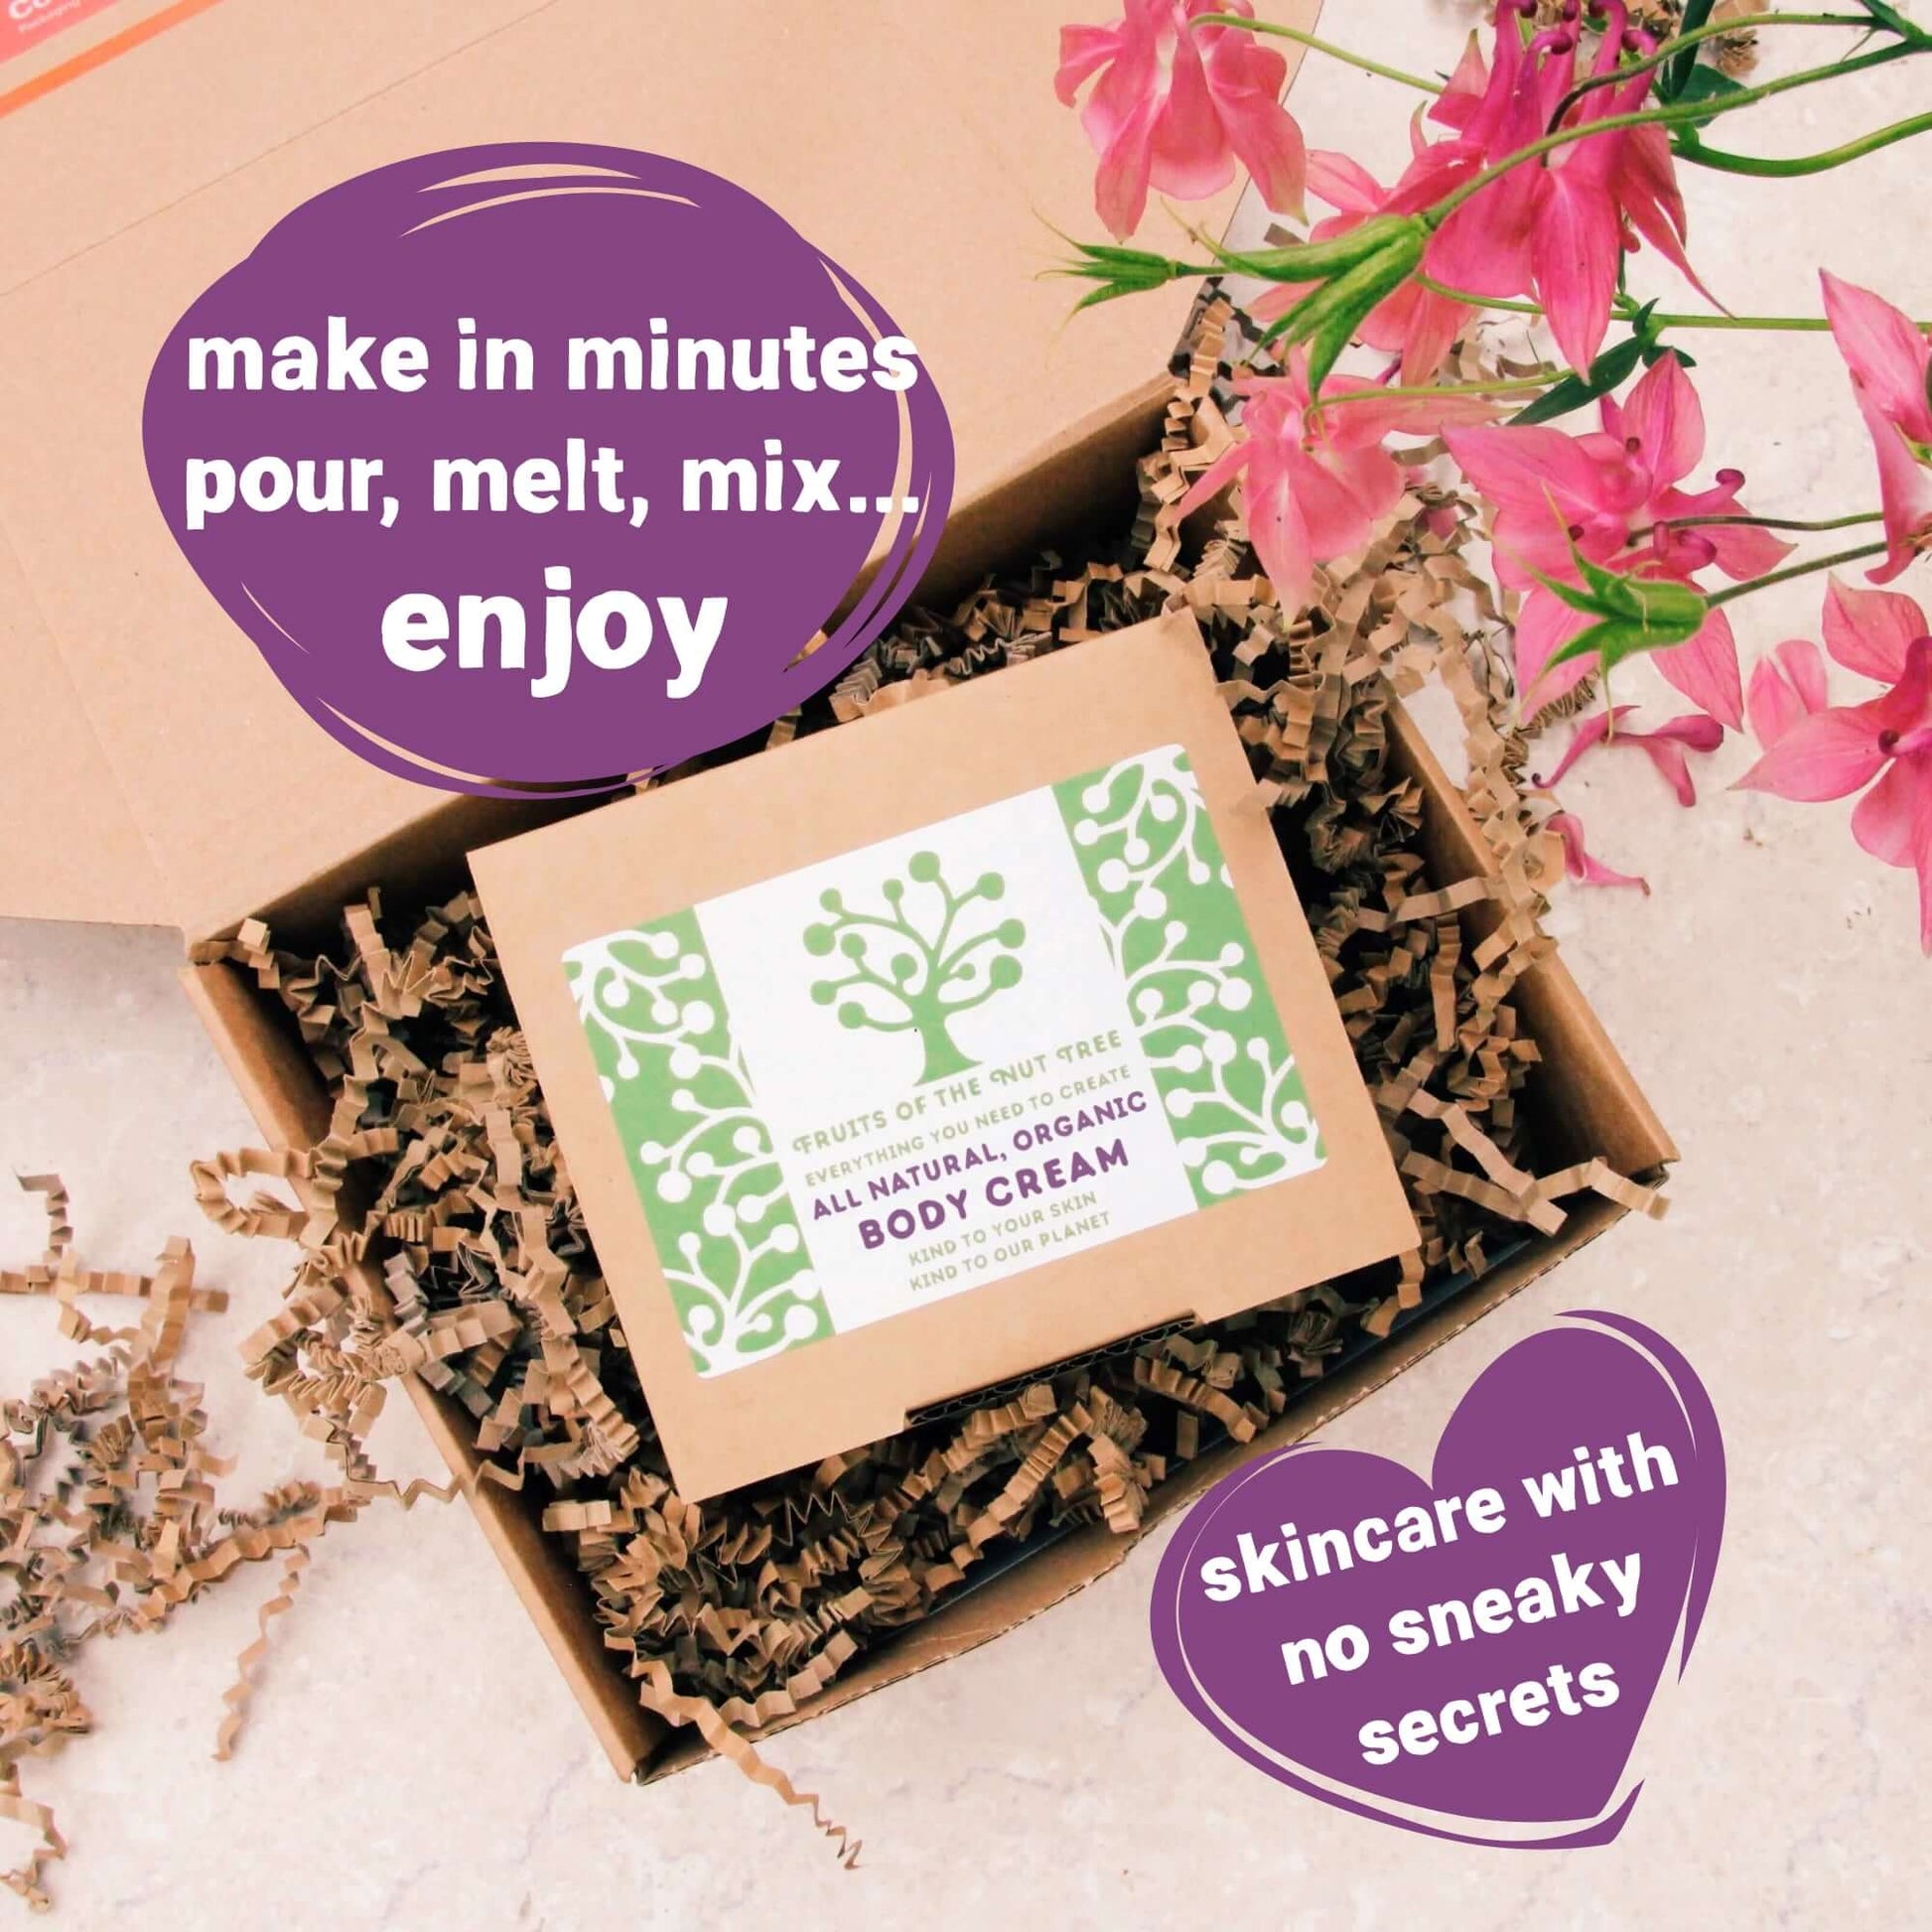 make your own body cream kit in eco-friendly skincare box